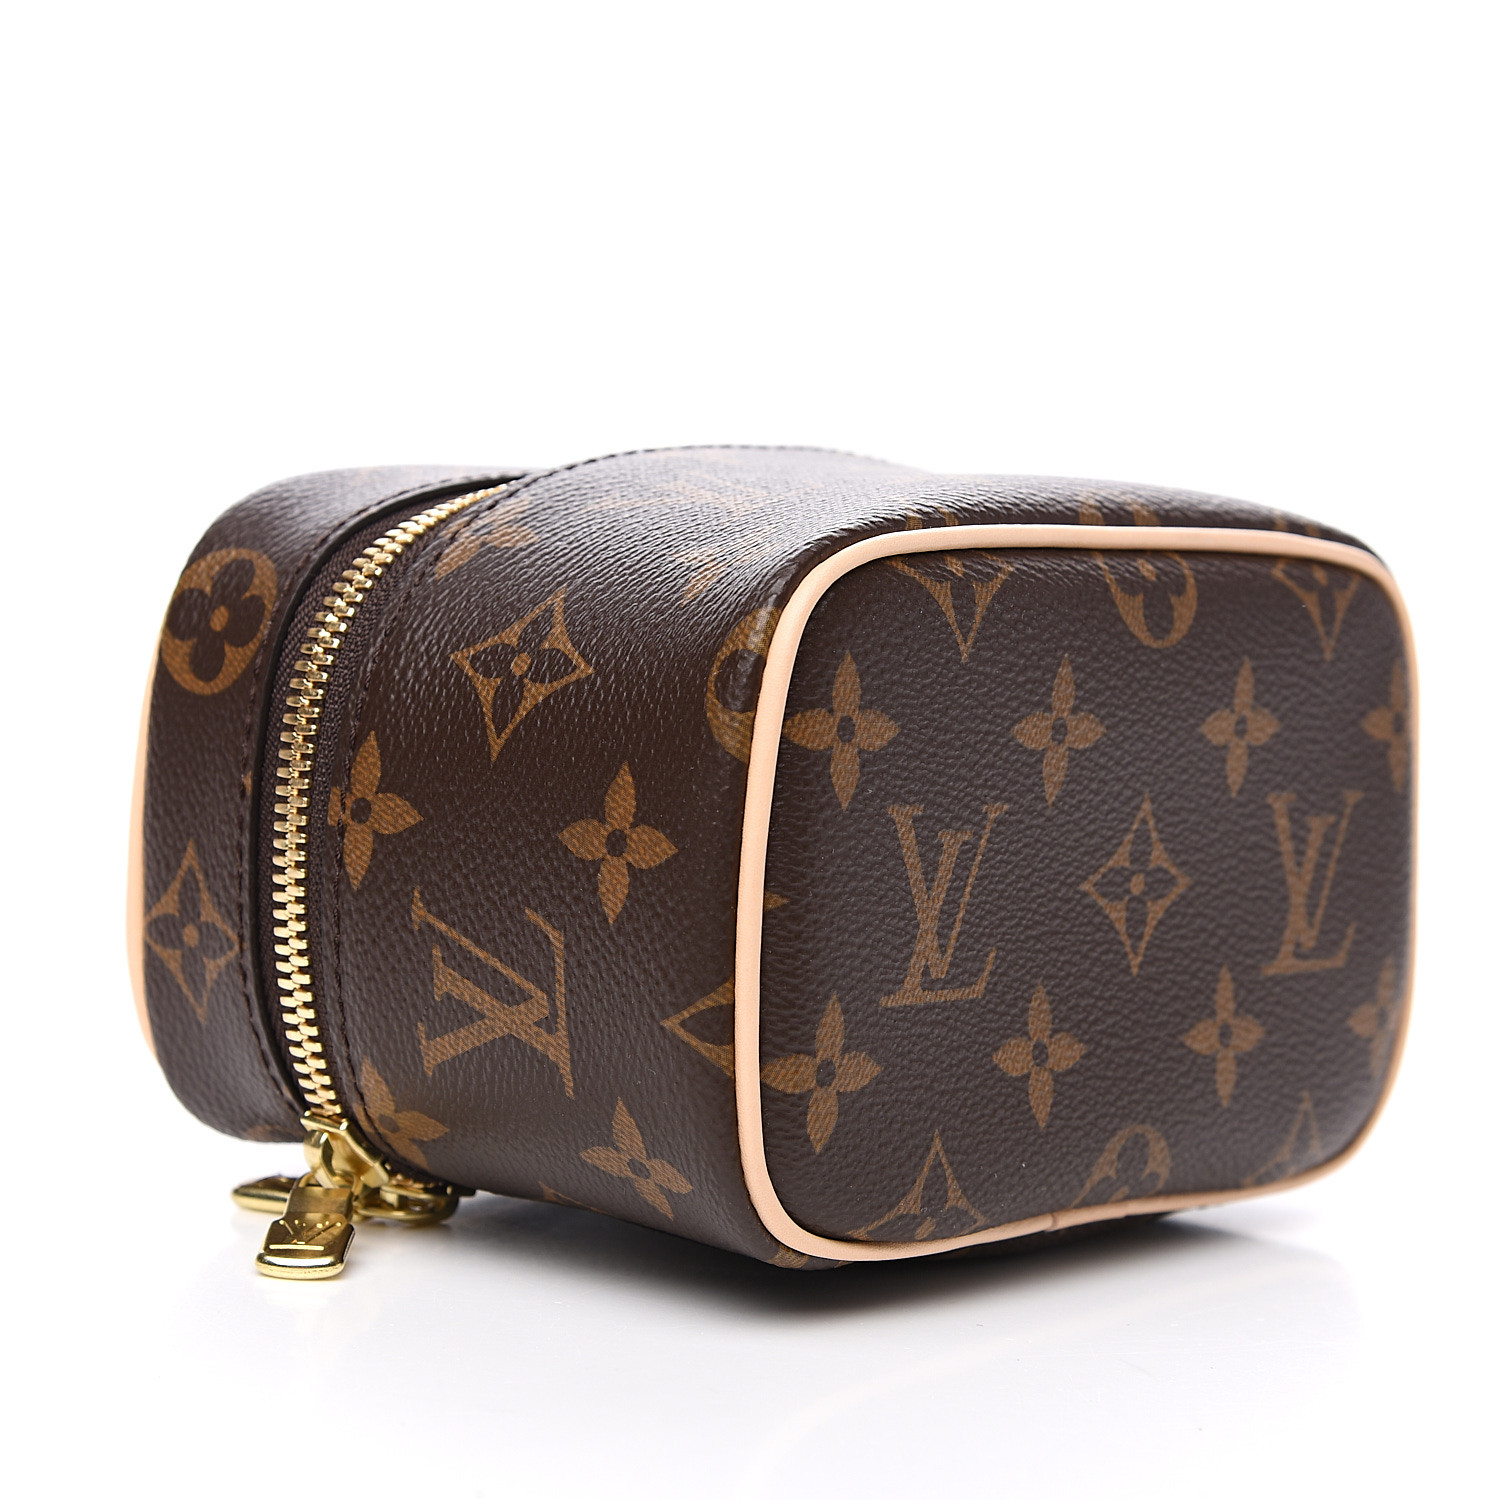 Call me basic but any links for a QUALITY neverfull? : r/DHgate